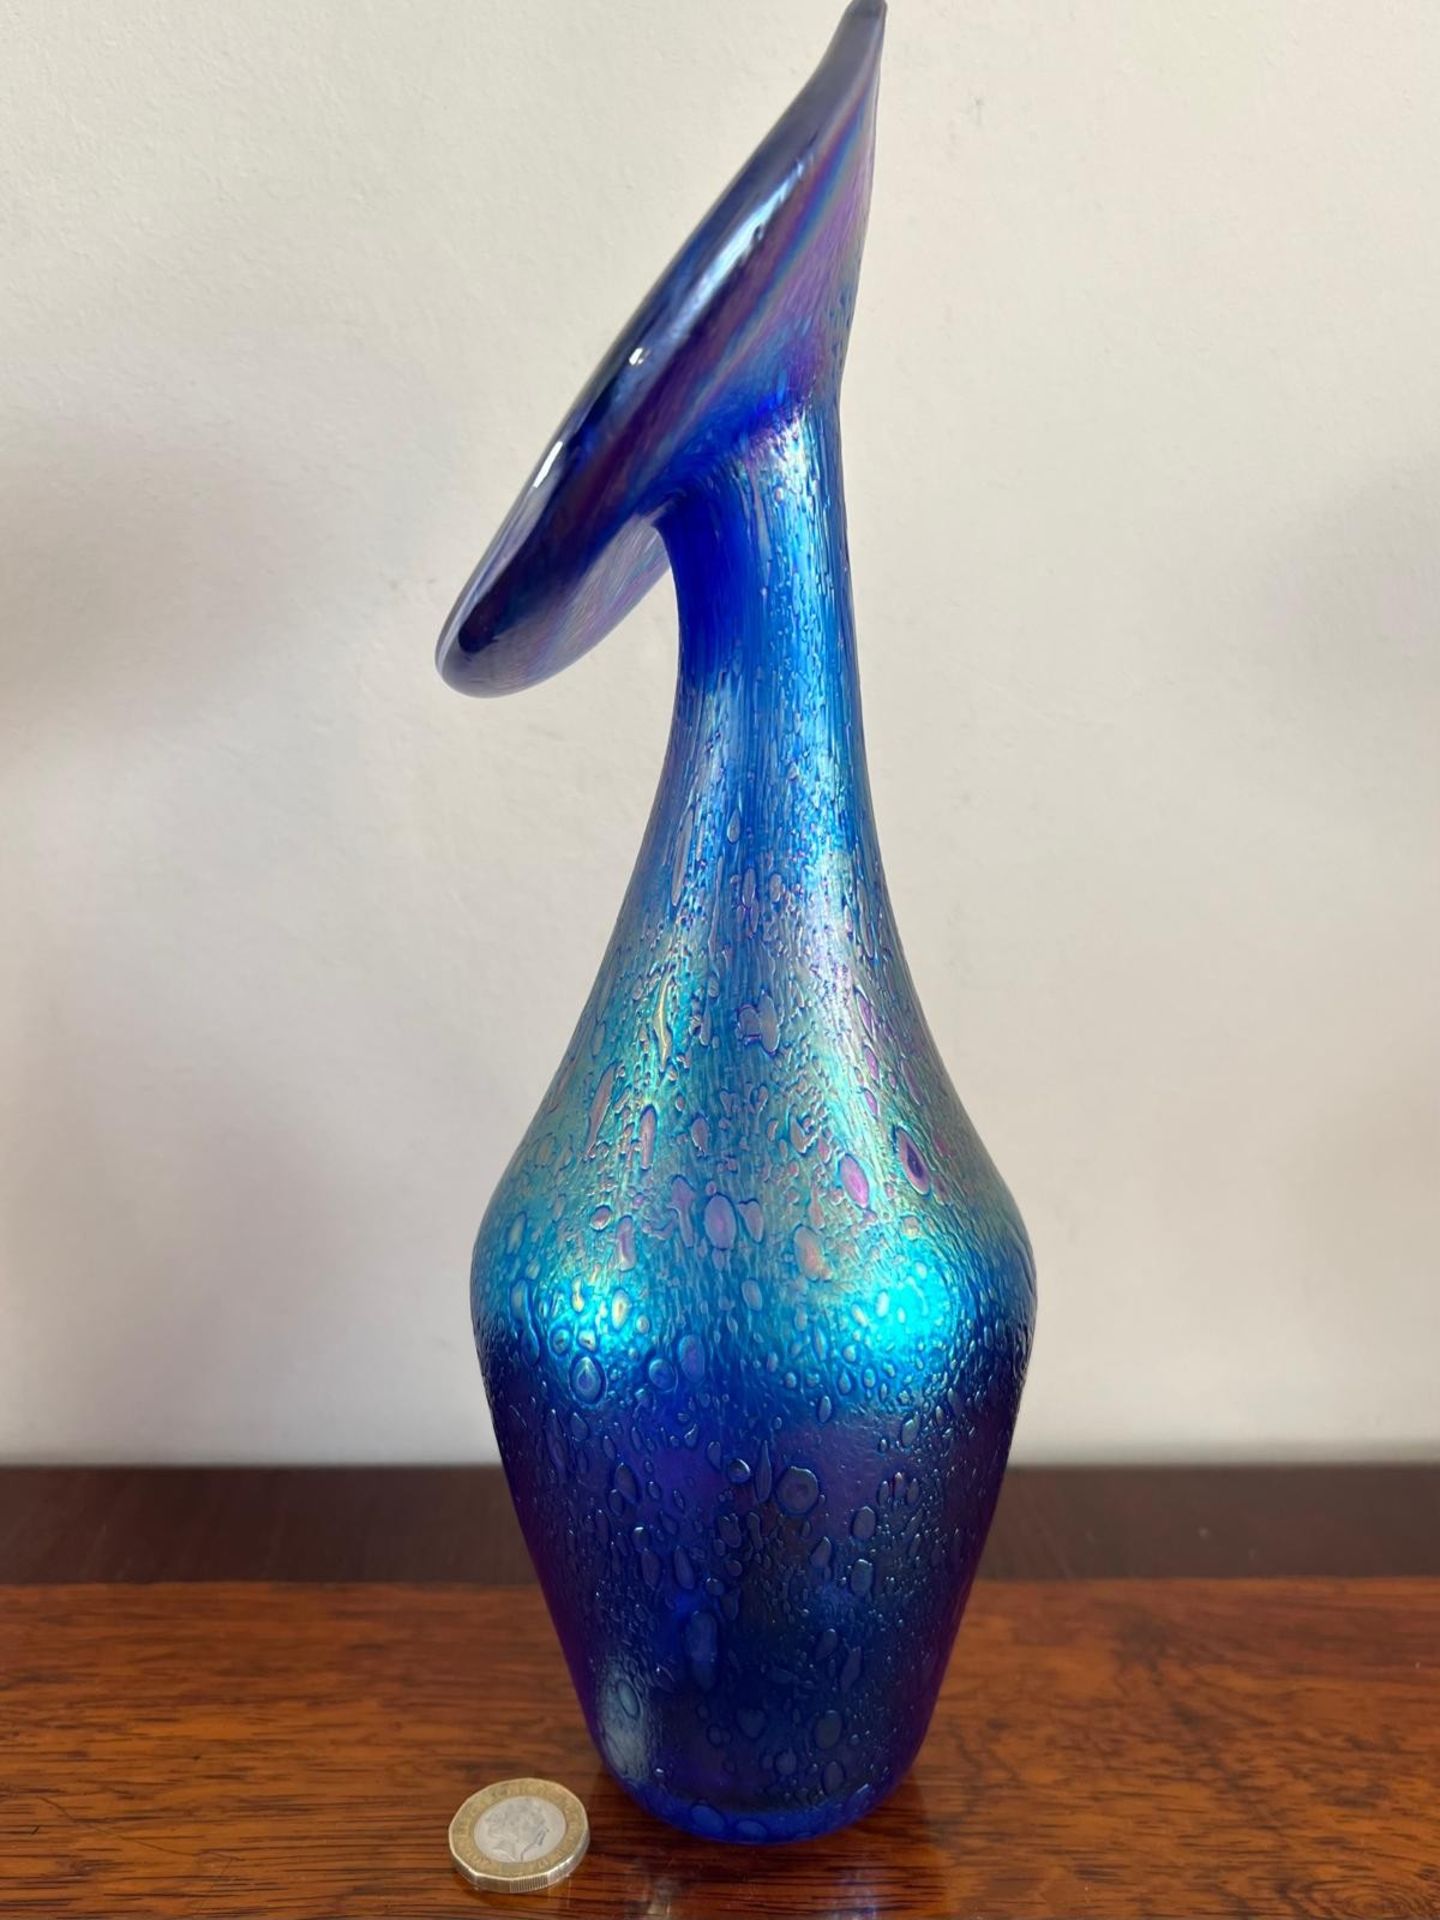 ART NOUVEAU IRIDESCENT GLASS VASE ATTRIBUTED TO HERON GLASS, APPROX 29cm HIGH - Image 3 of 3